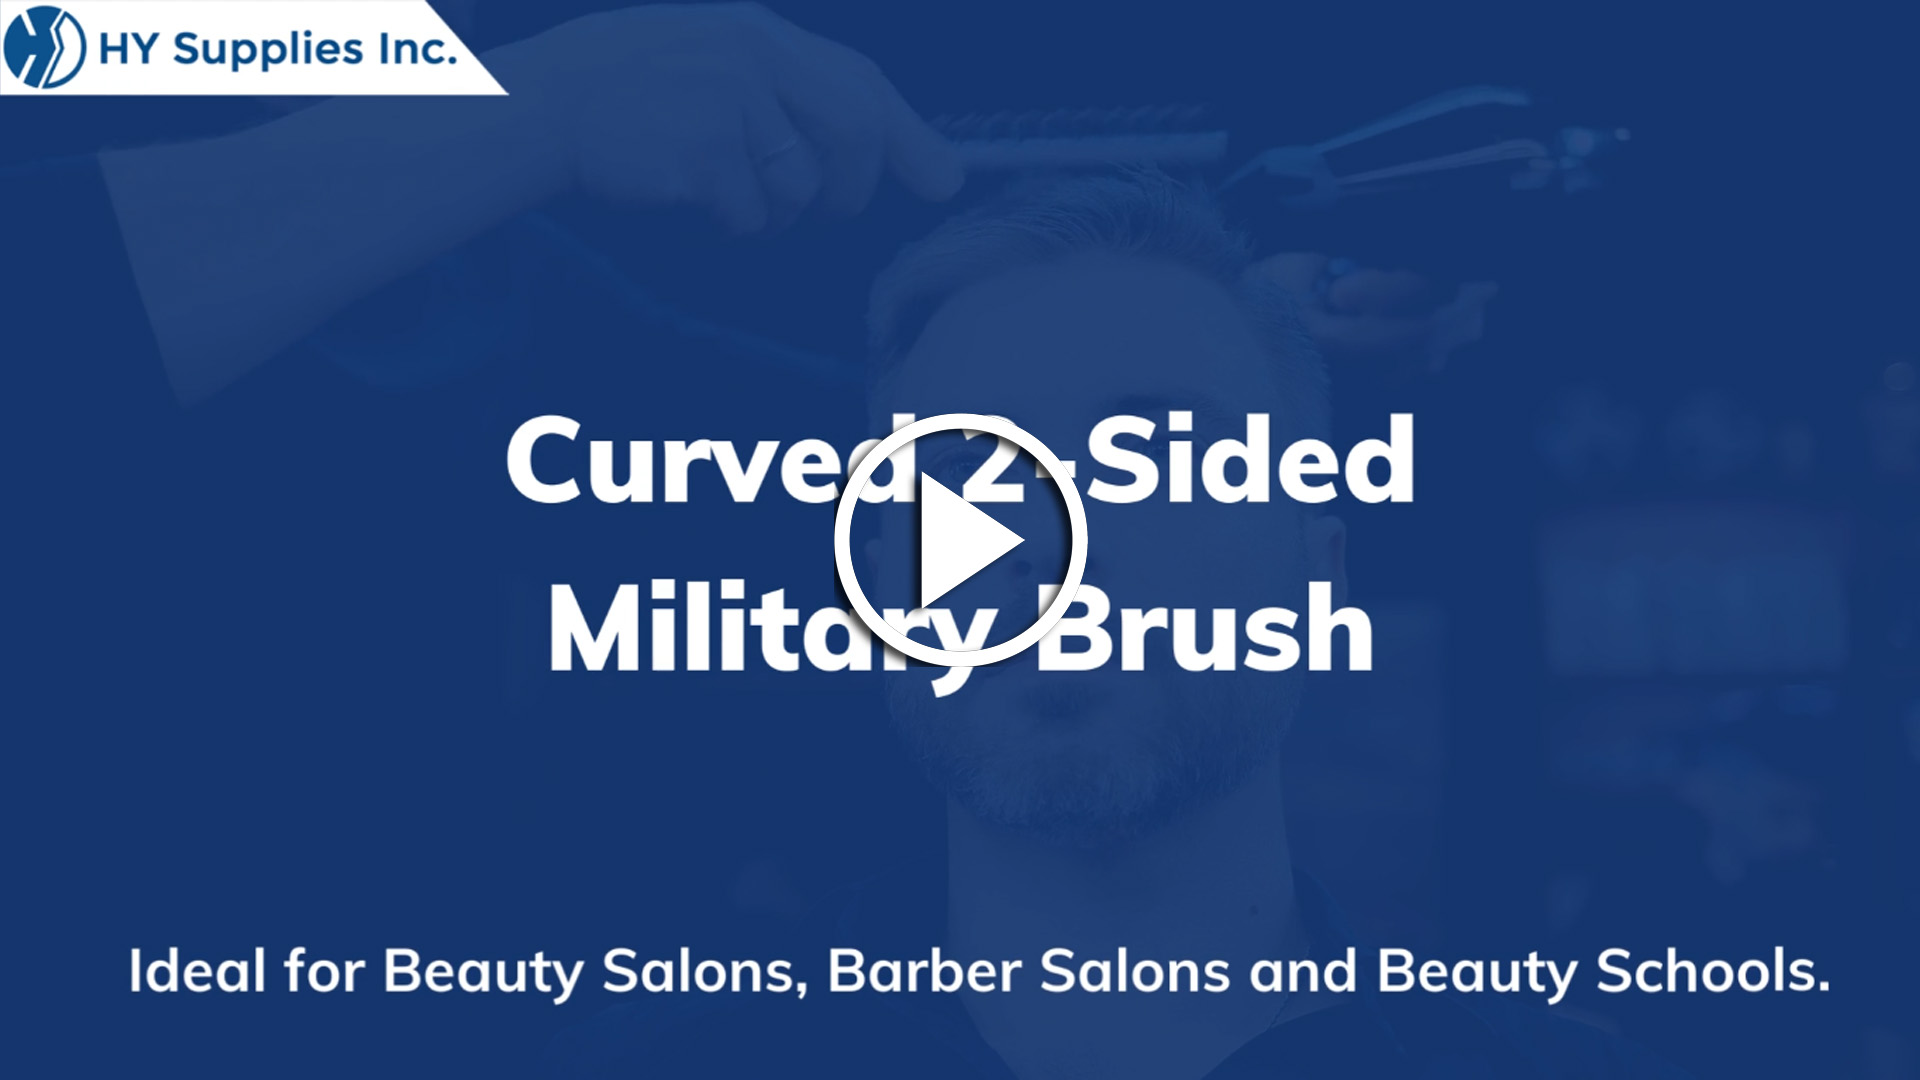 Curved 2-Sided Military Brush